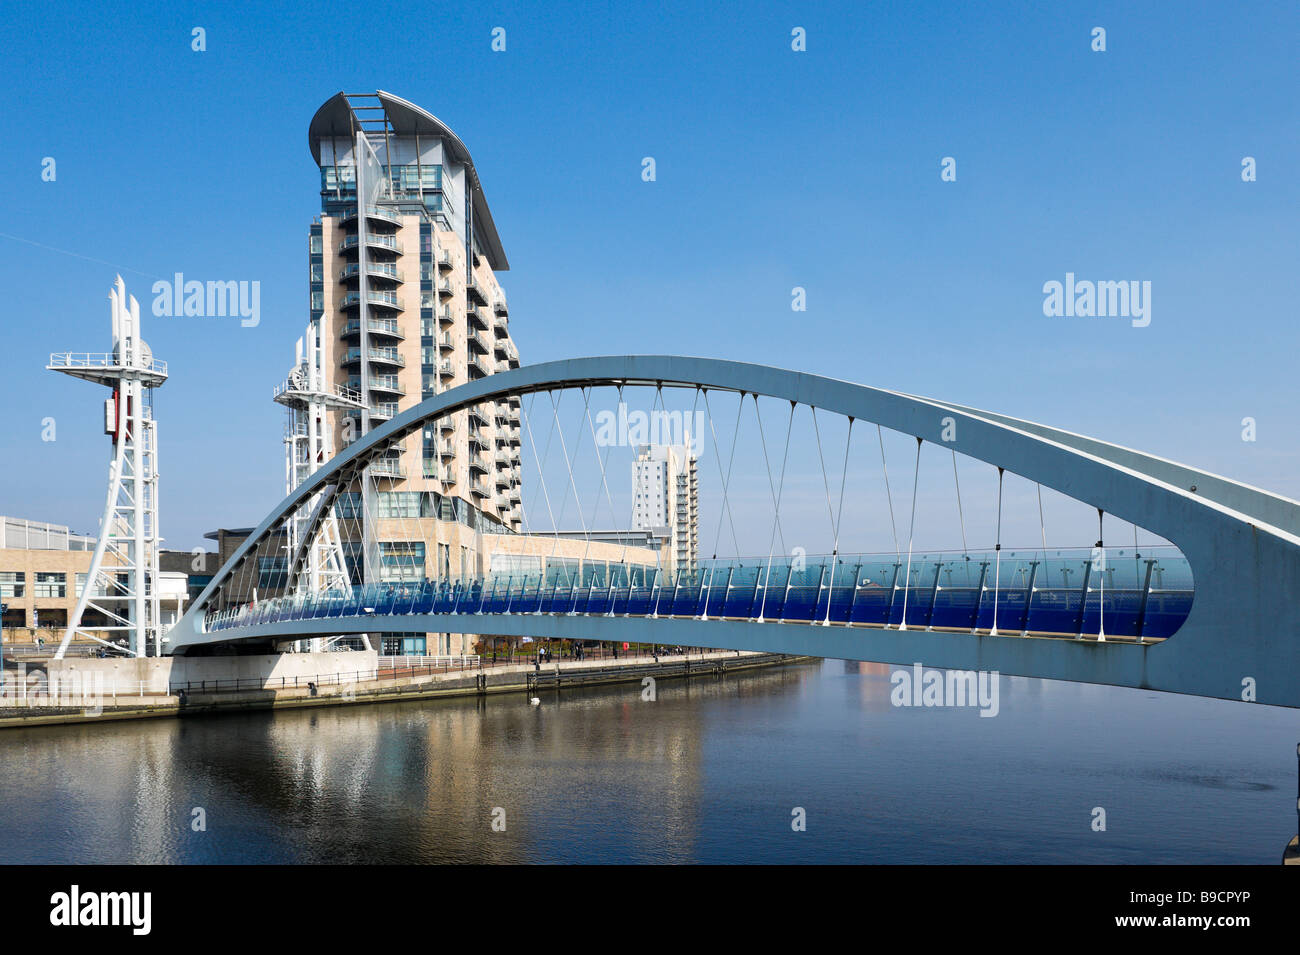 Modern flats behind the Millennium lifting footbridge over the Manchester Ship Canal, Salford Quays, Greater Manchester, England Stock Photo